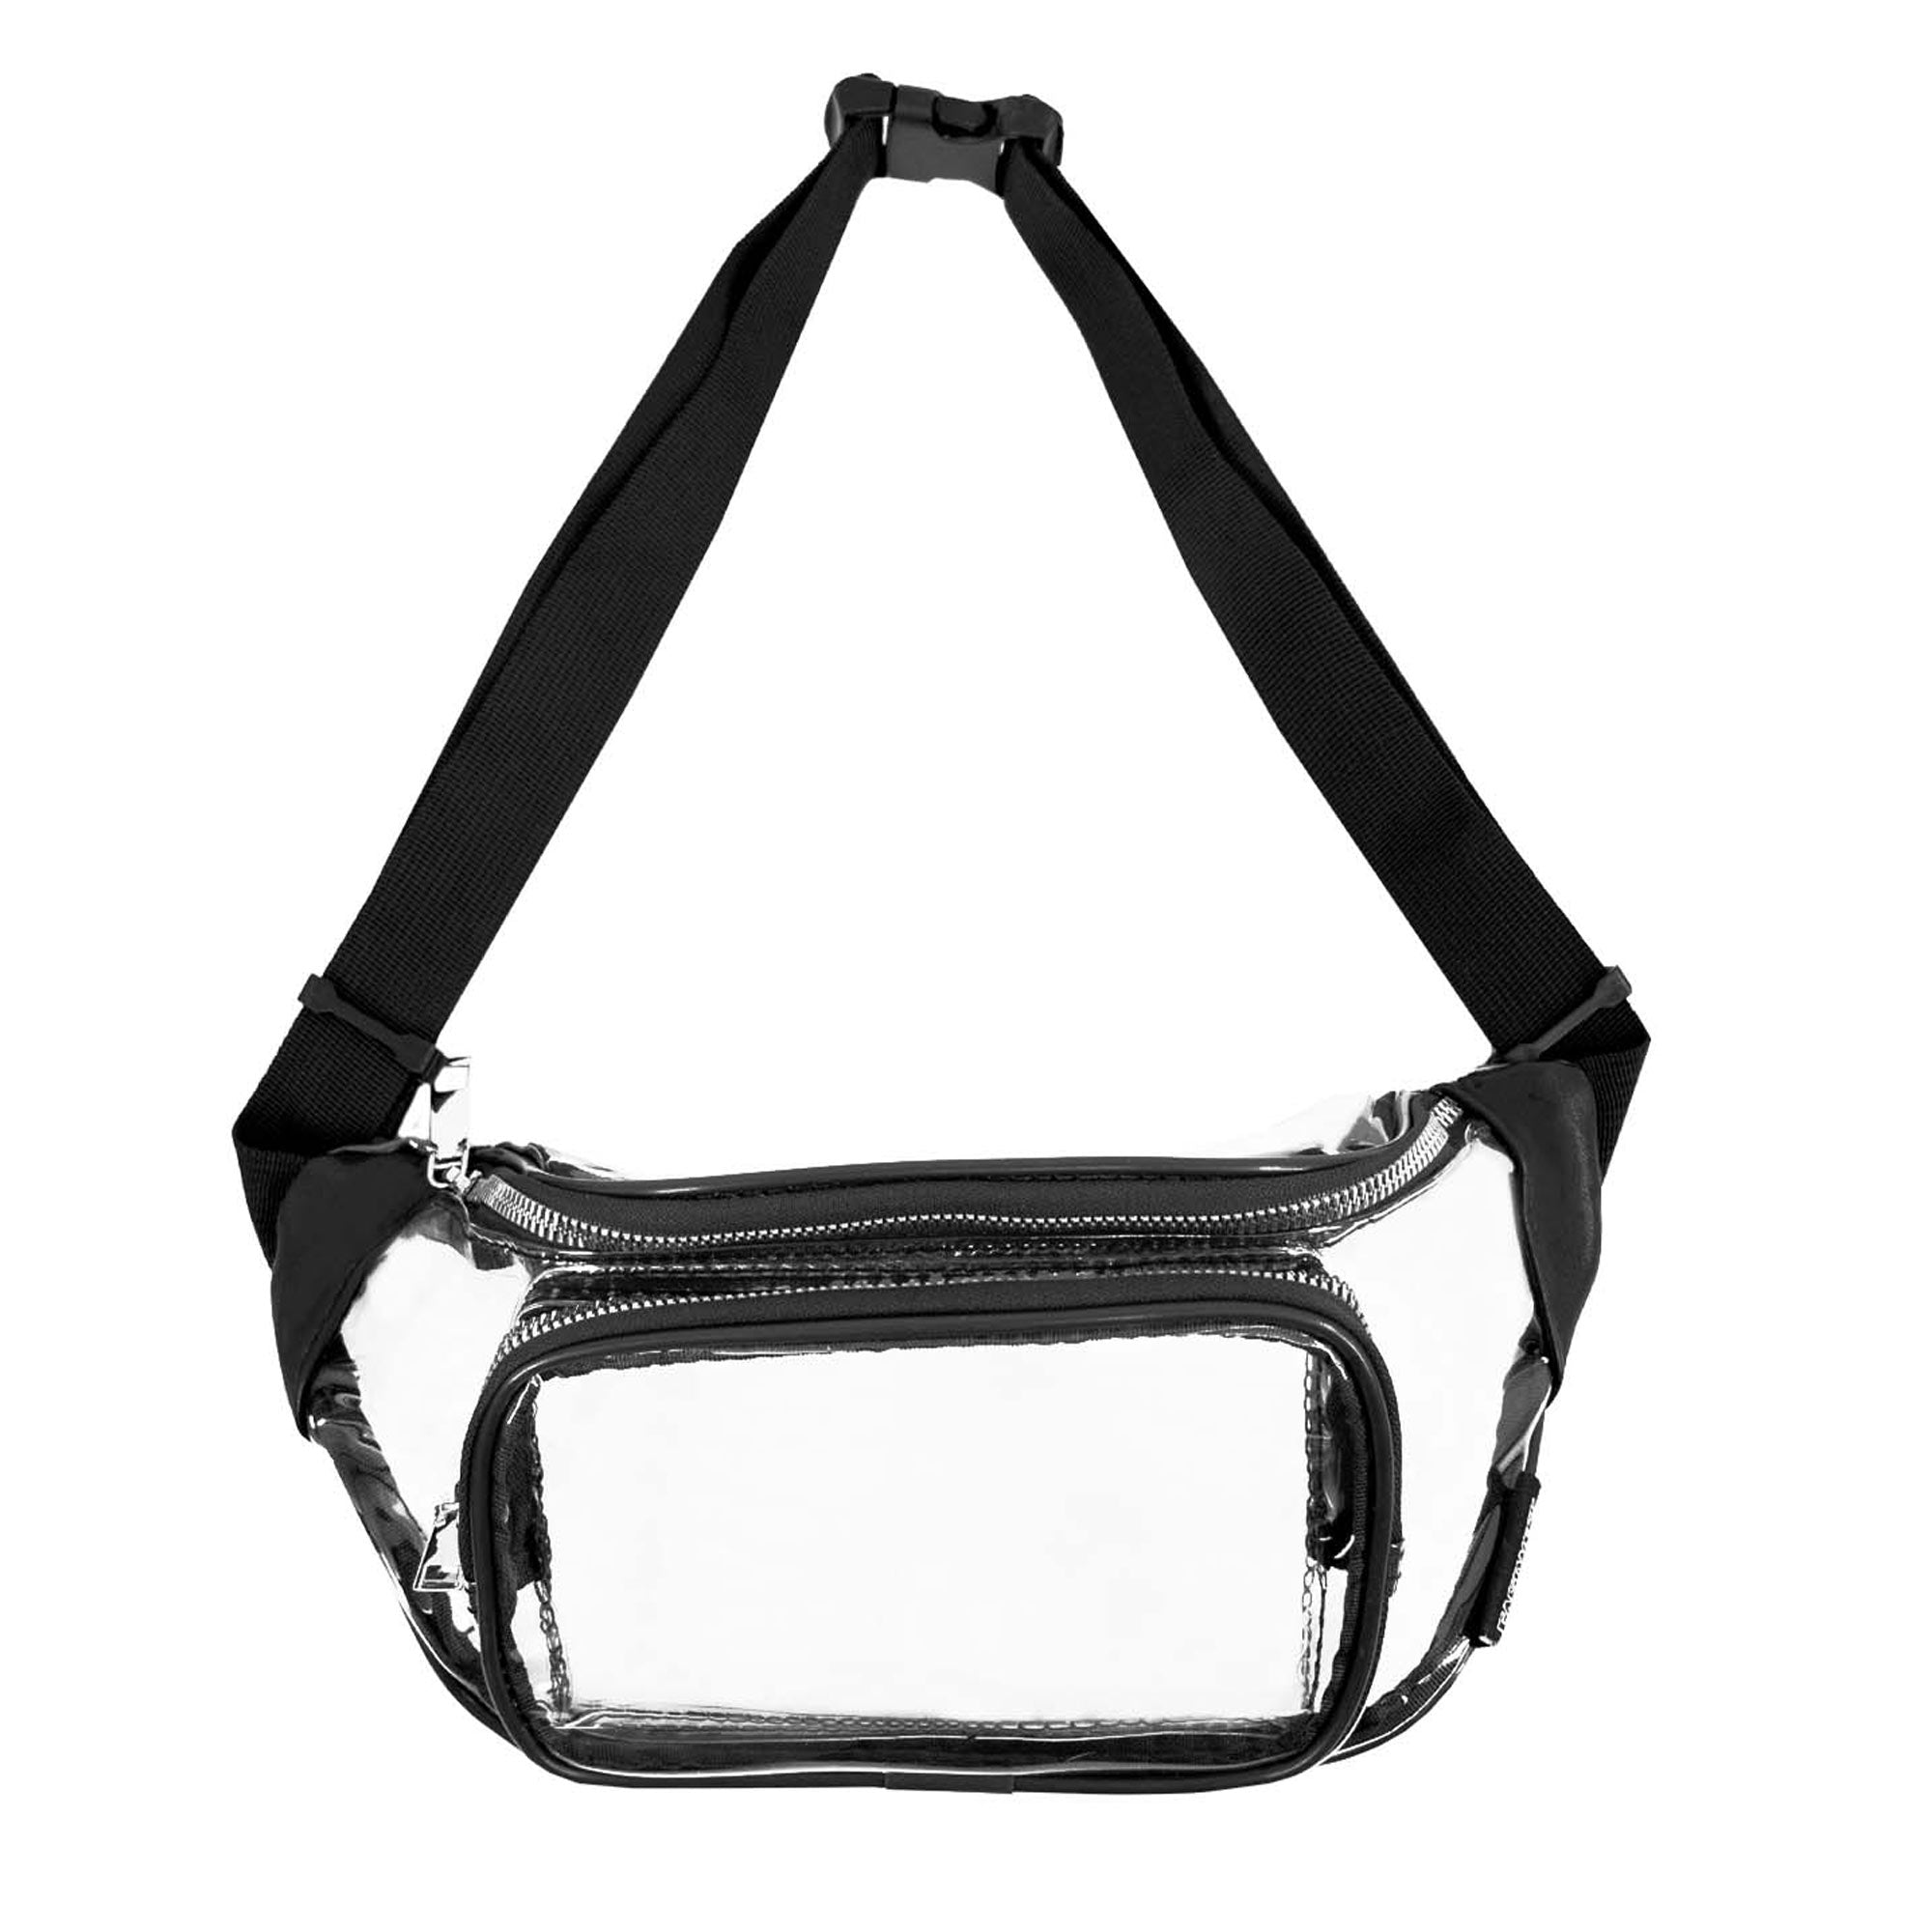 Wholesale Fanny Packs Now On Clearance | Belt Bags & Fanny Bags